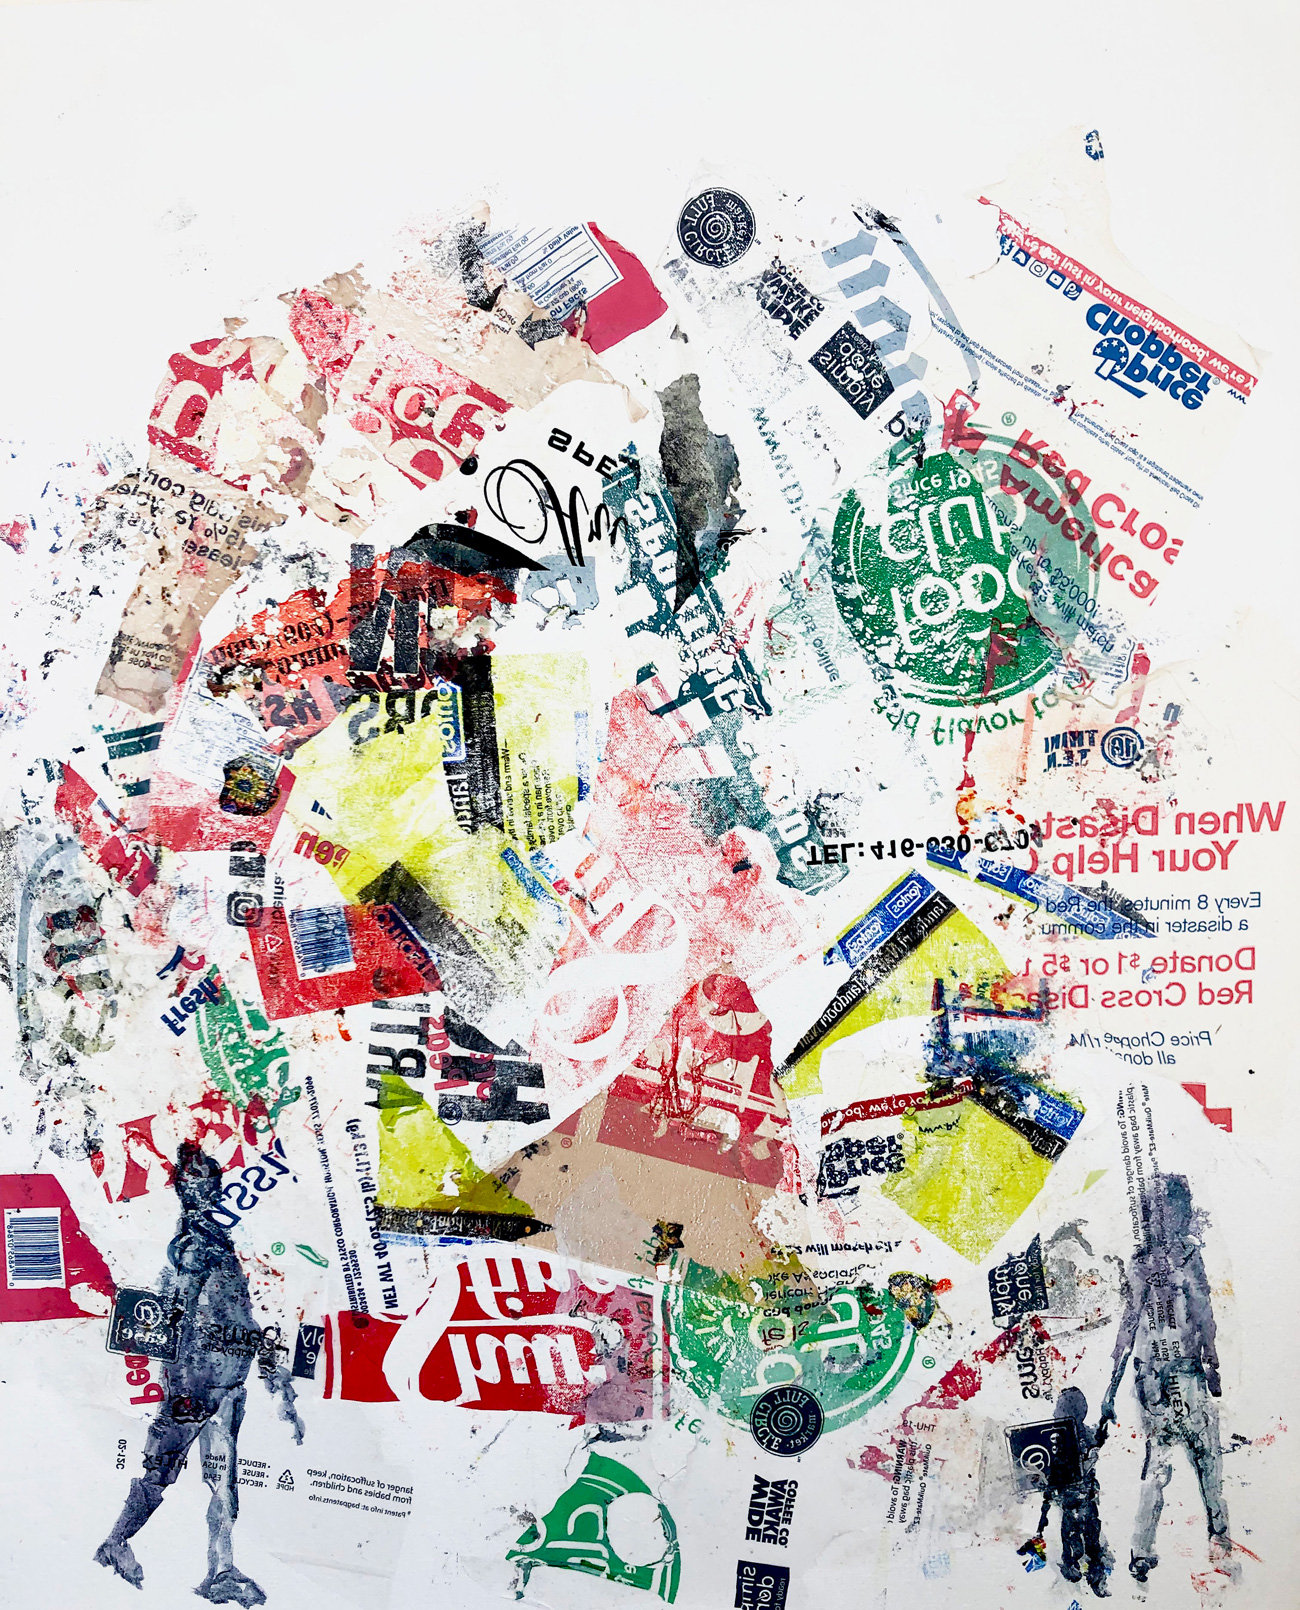 20._Plastic-City_-plastic-bags--fused-imprinted-with-acrylic-paint-on-canvas-32-x30_-2019-2900-